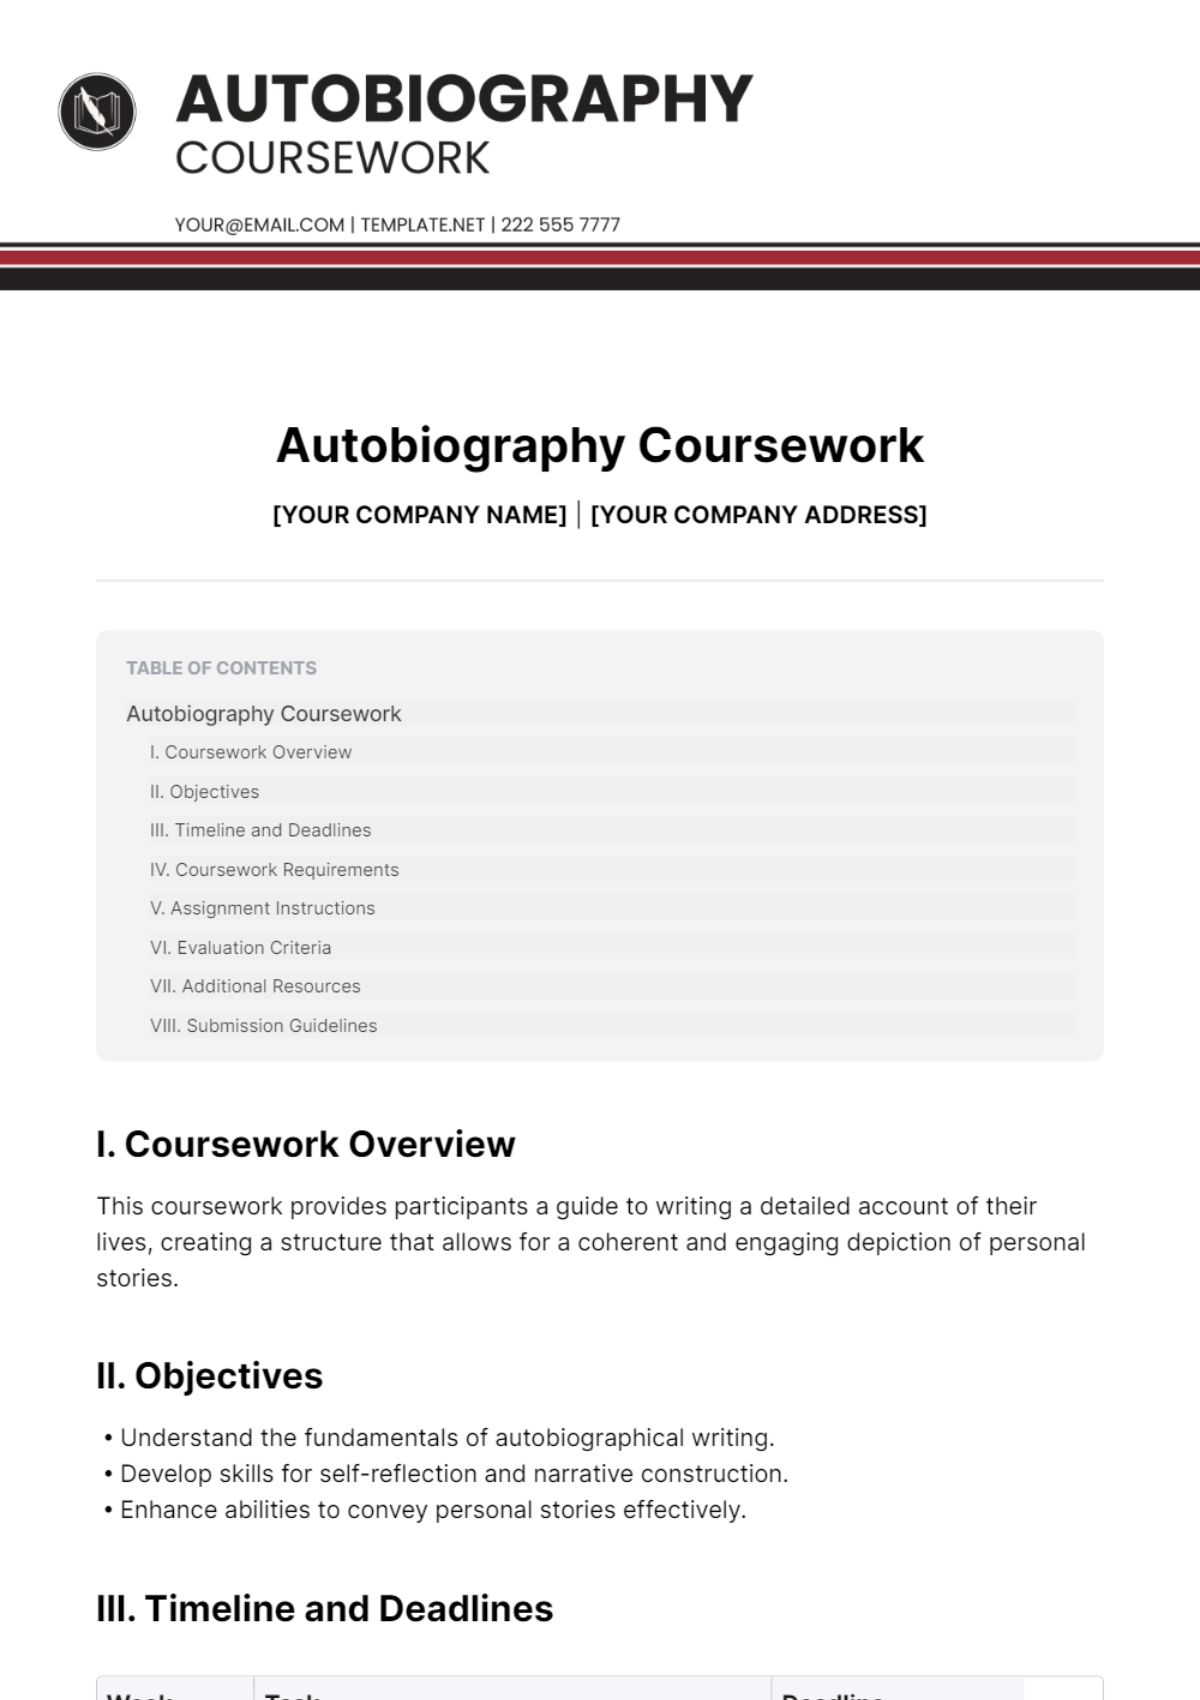 Free Autobiography Coursework Template